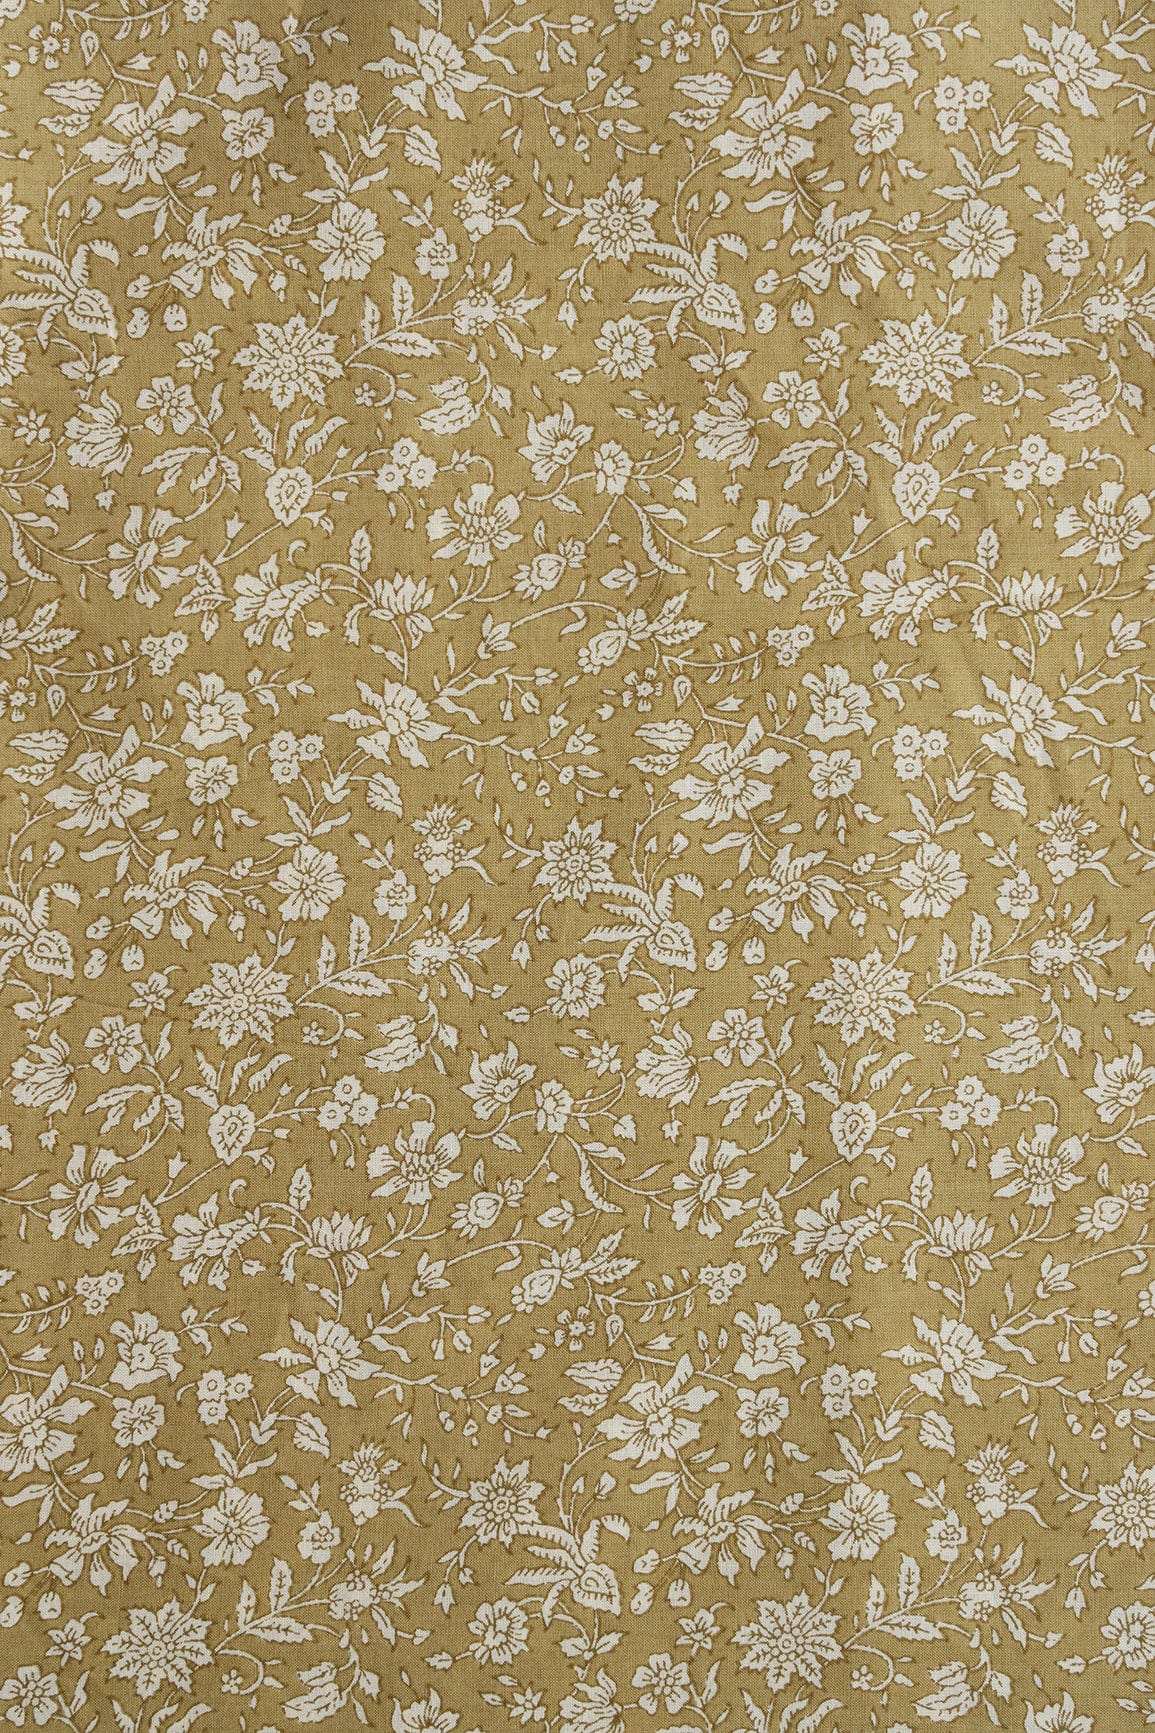 doeraa Prints Olive Green And Beige Floral Print On Pure Mul Cotton Fabric